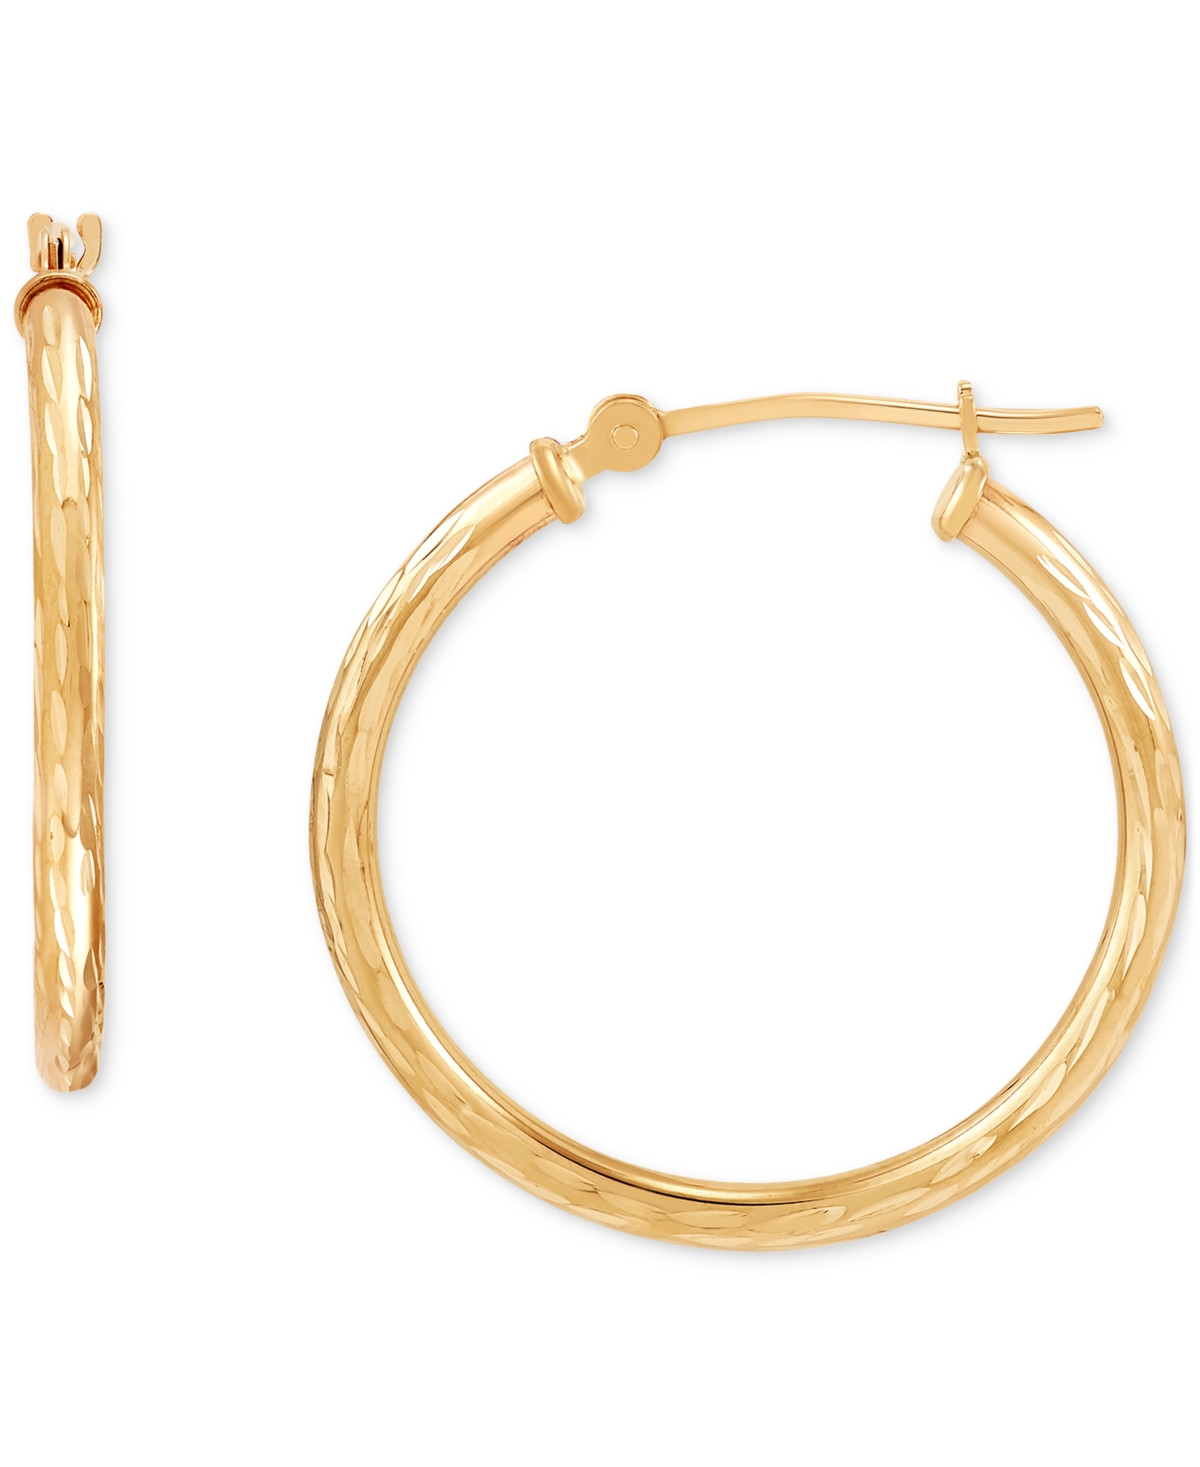 Macy's Polished Leaf Texture Small Hoop Earrings In 10k Gold, 1"